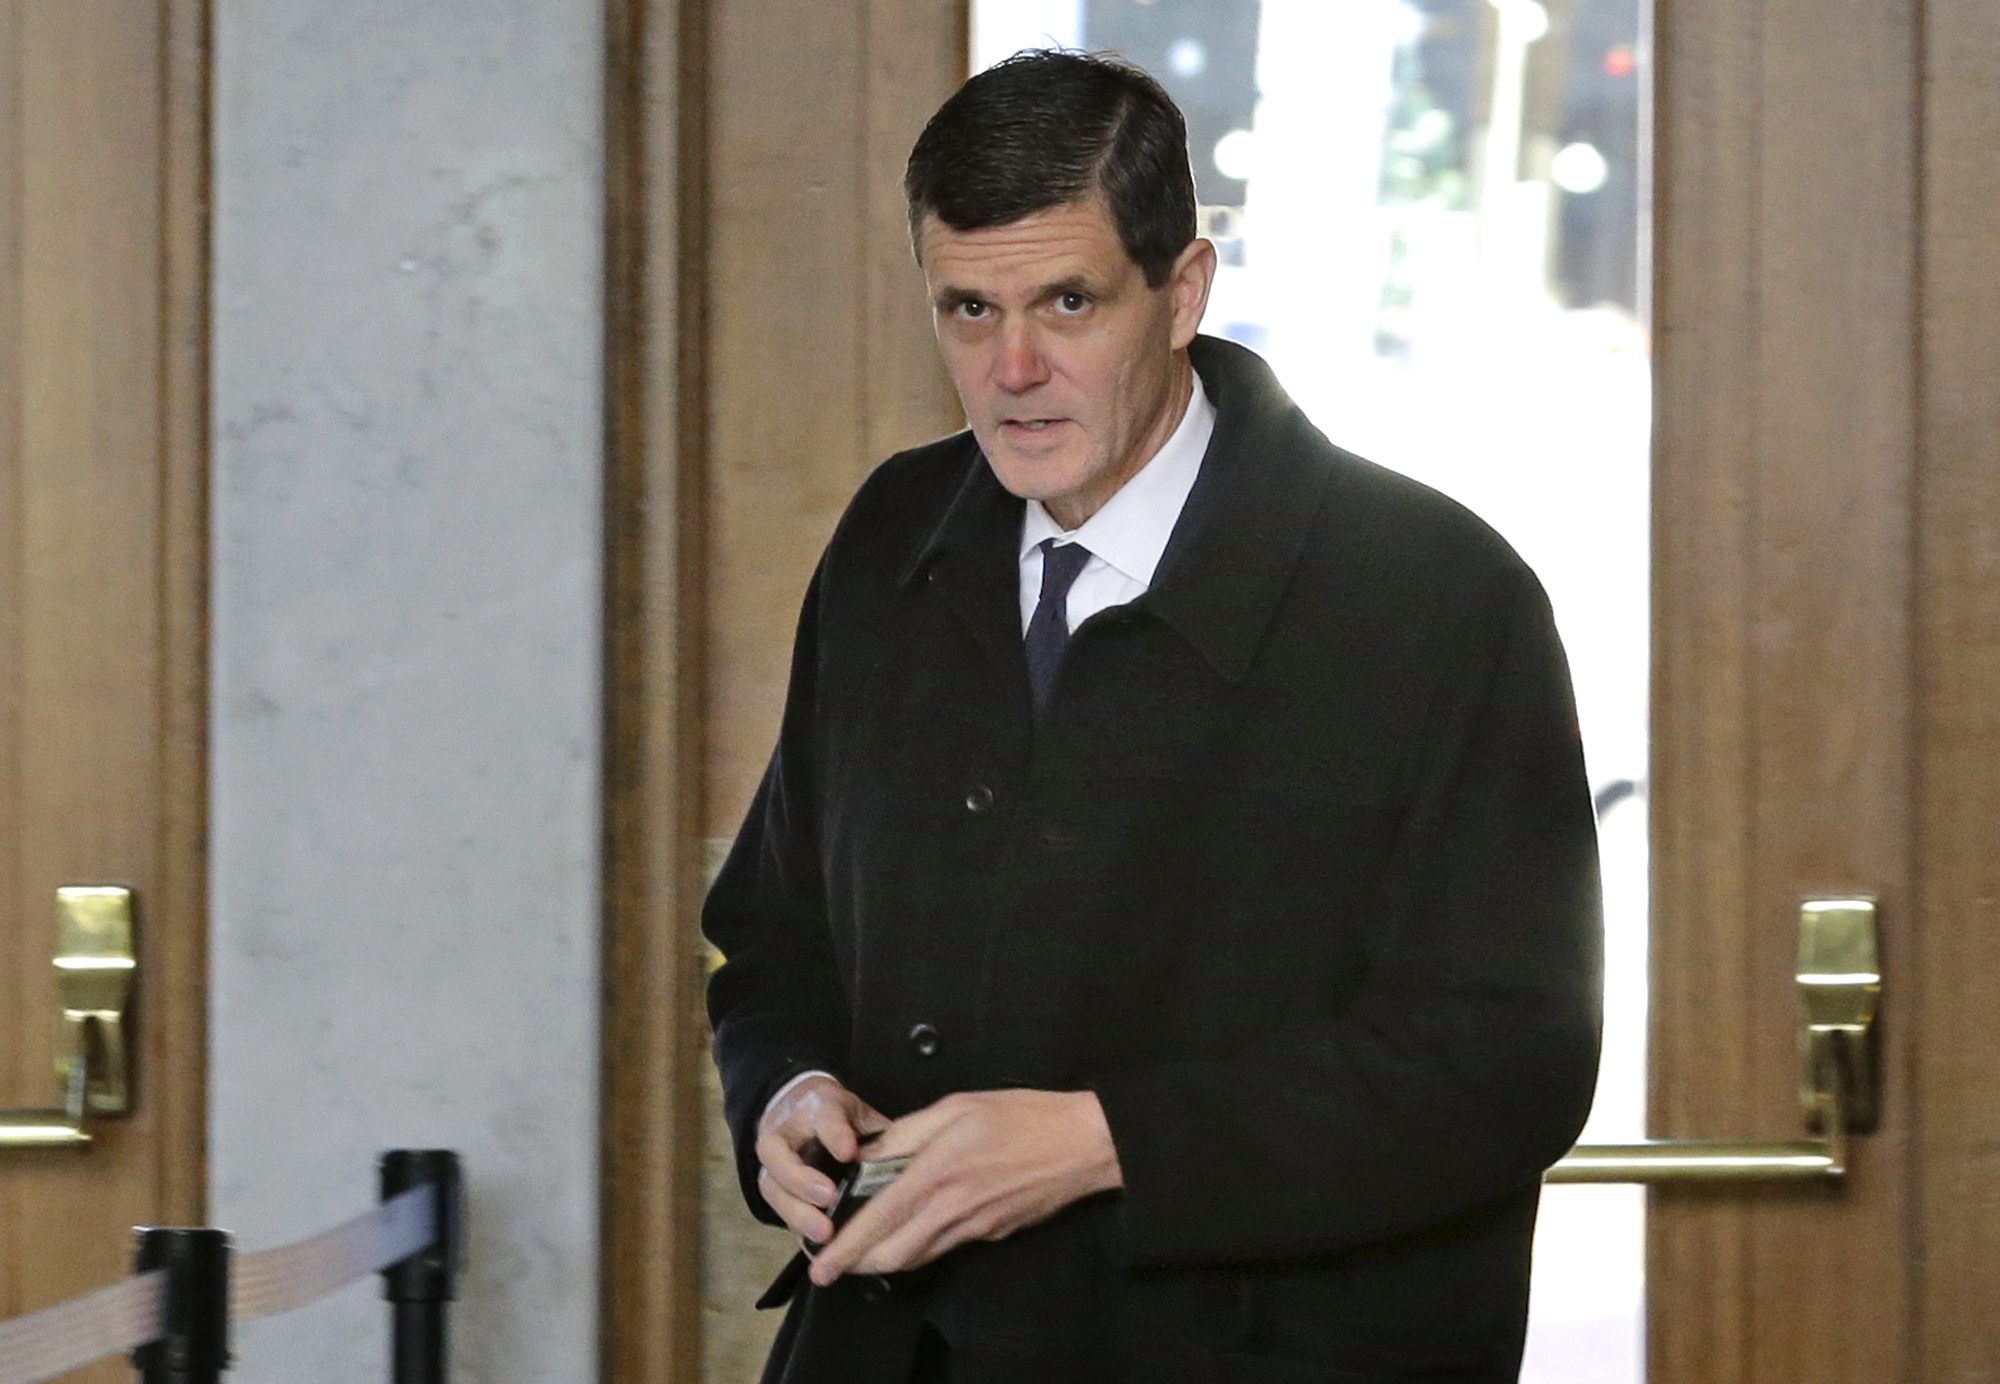 Washington Auditor Troy Kelley holds his wallet after showing his identification as he arrives for a federal court hearing Tuesday in Tacoma. Kelley was asking a judge to force the Justice Department to return $908,000 that was seized from Kelley after he was charged criminally with possession of more than $1 million in stolen money as well as money laundering. (AP Photo/Ted S.